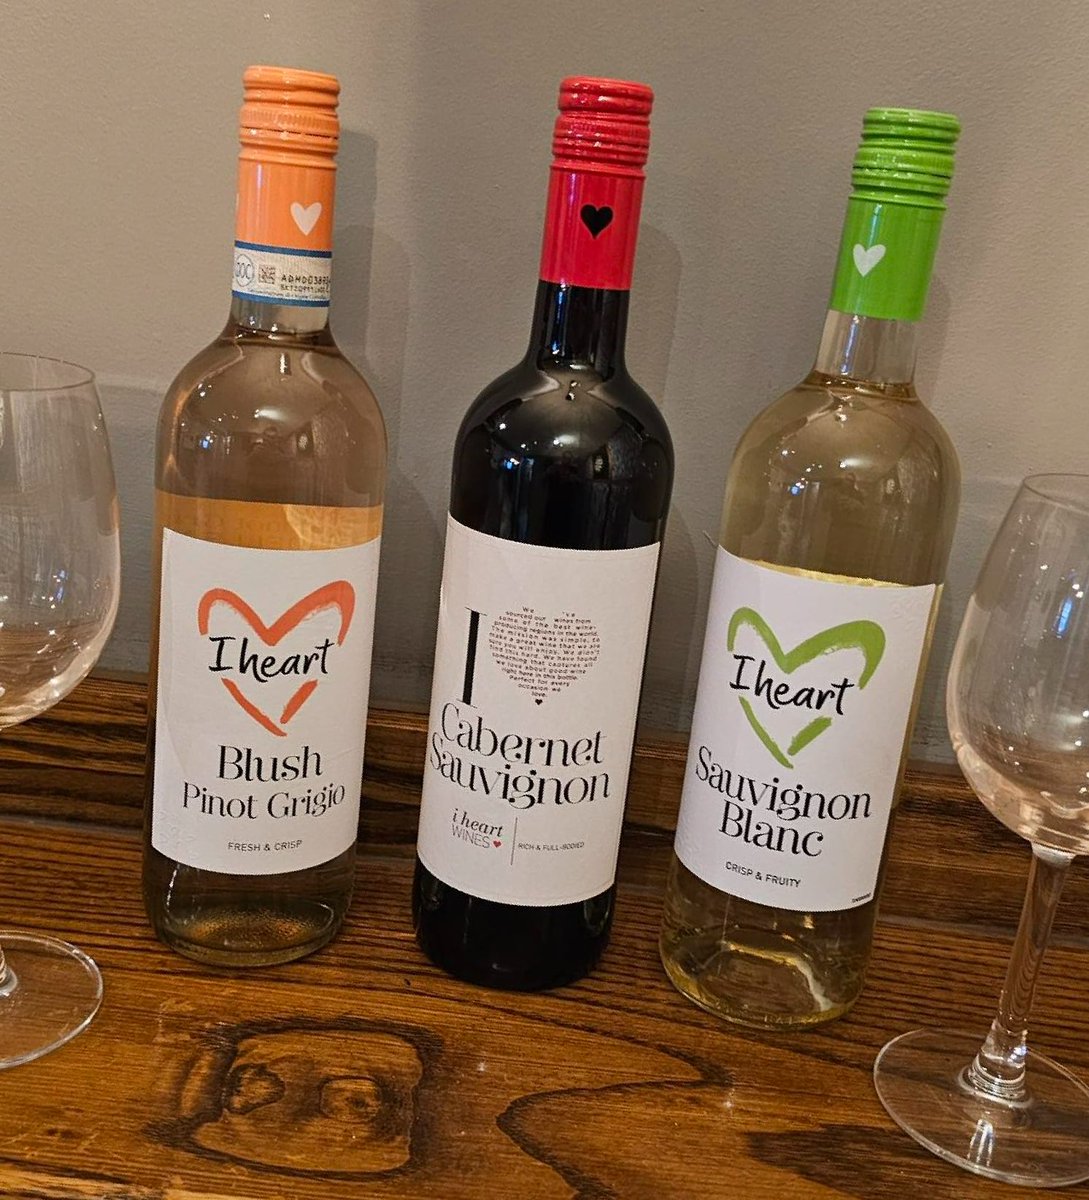 Unwind with a bottle of I Heart wine for just £7.99 this Wine Wednesday! Red, rose, or white – the choice is yours. Don't miss out on this deal to enjoy some quality family time at your favourite pub. #WineWednesday #IHeartWine 🍷🍇💕